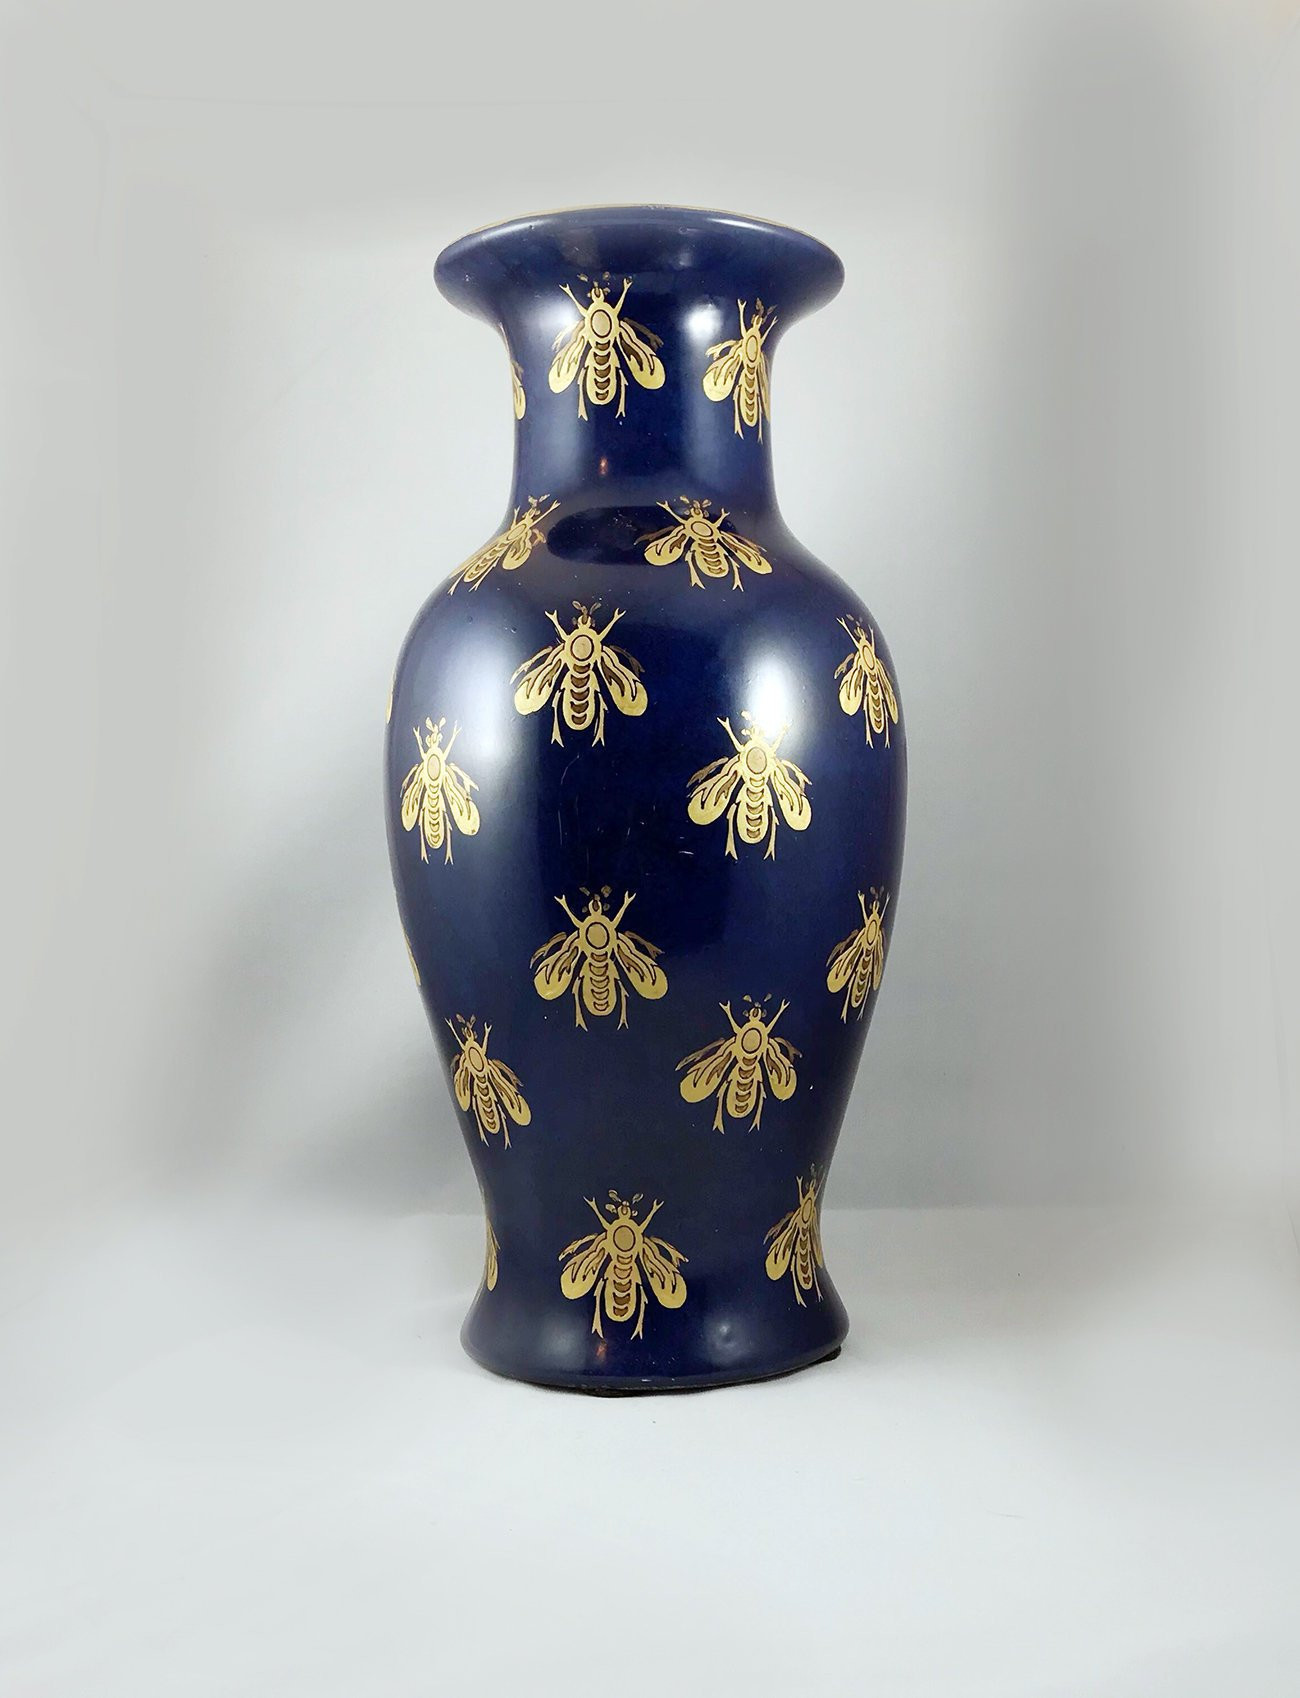 20 Fabulous Chinese Porcelain Vases for Sale 2022 free download chinese porcelain vases for sale of royal blue flower vase with golden hand painted bumble bees etsy for dc29fc294c28ezoom